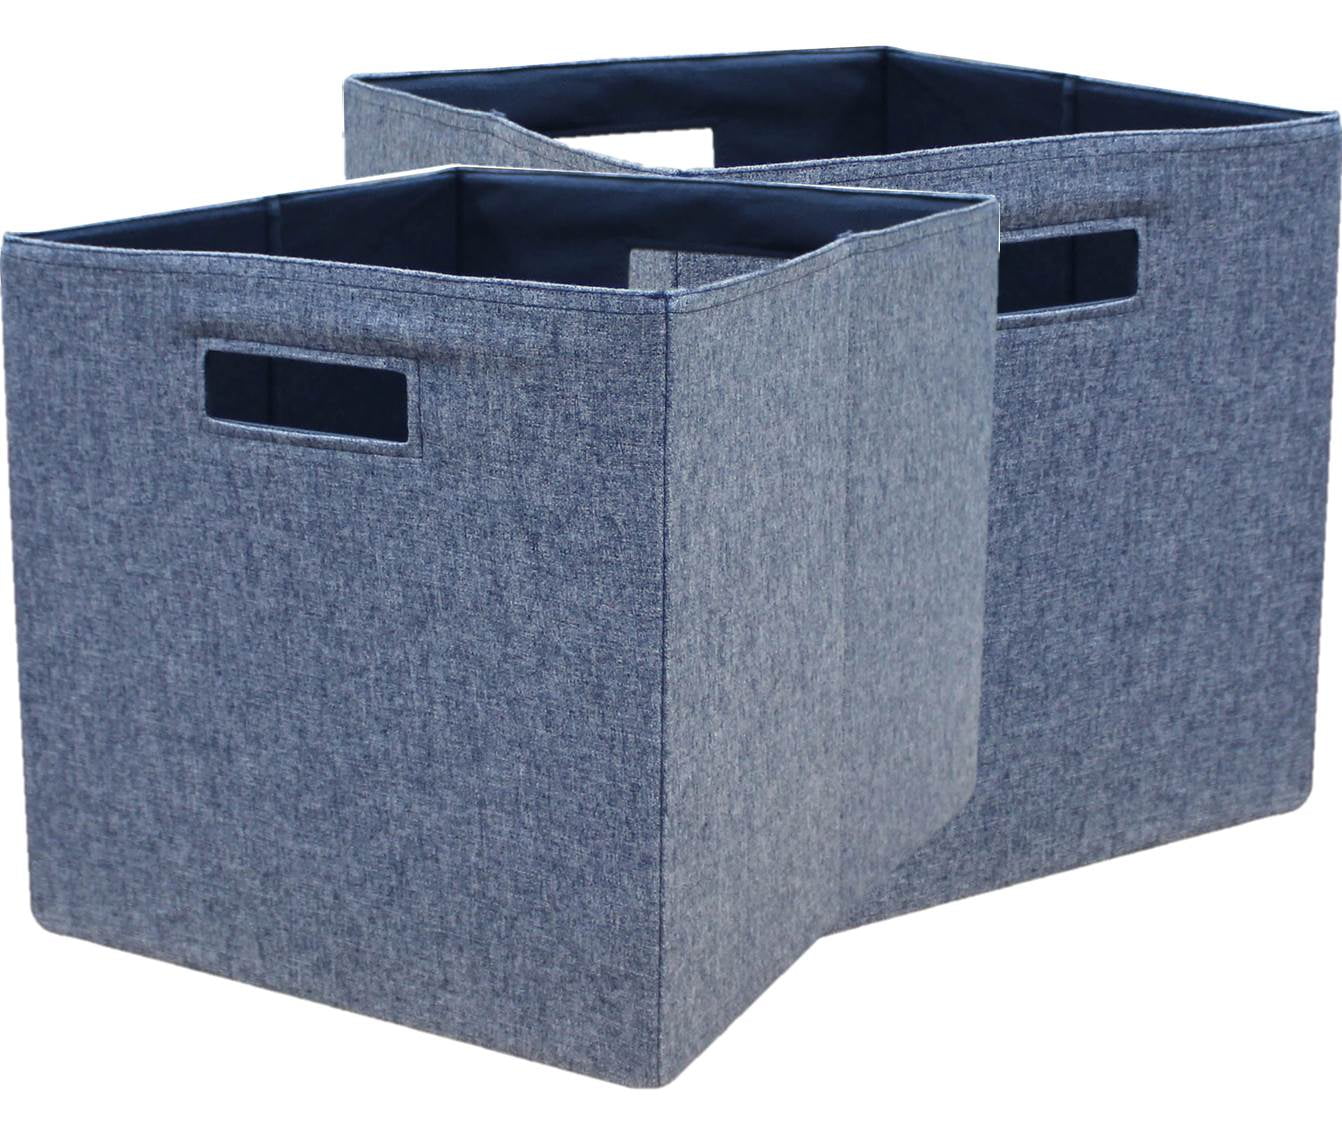 Fabric Collapsible Container Cube Bin Essentials-Office School Kids Baby Storage 